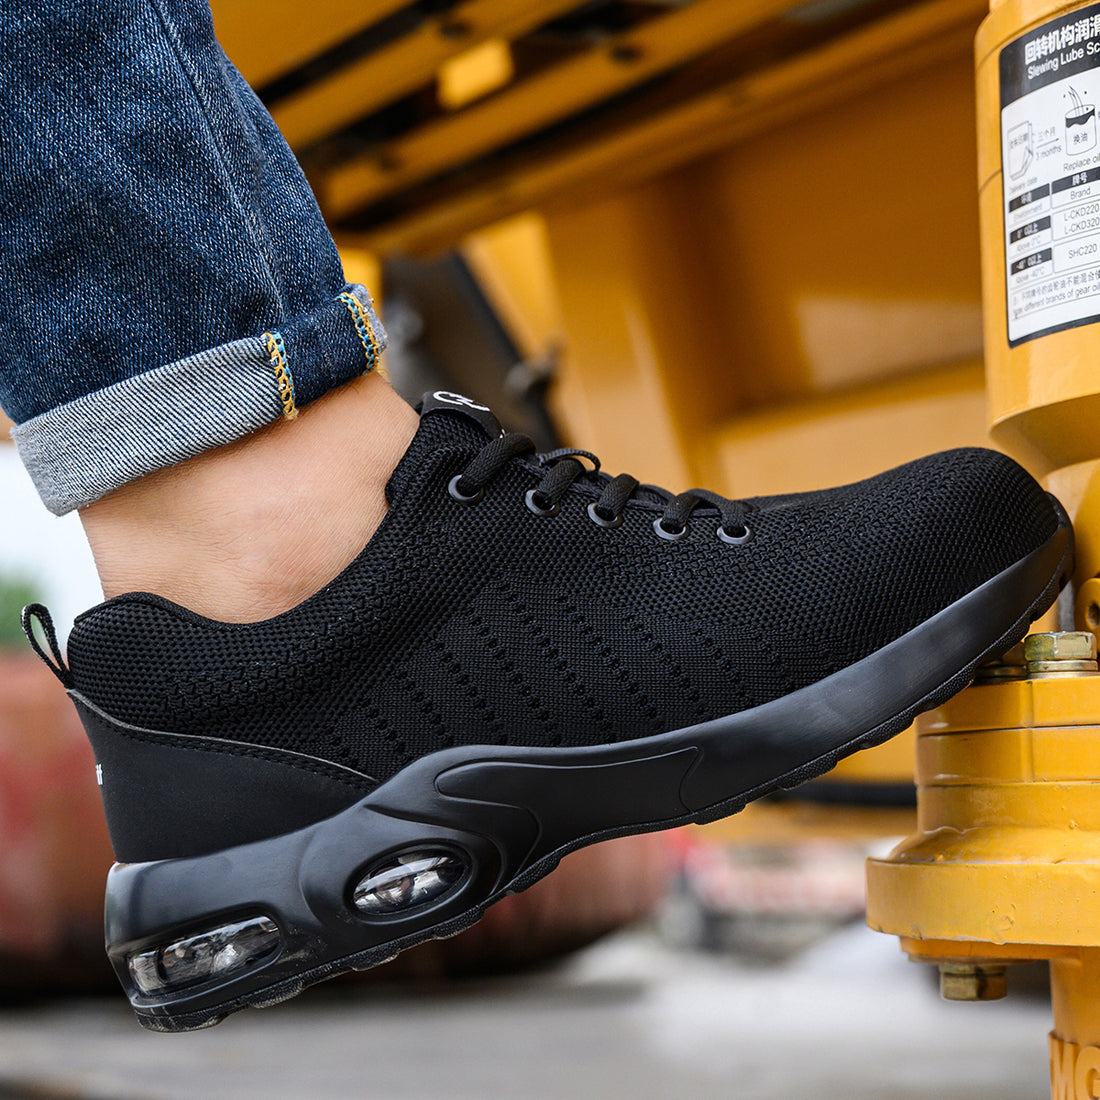 The Ultimate Guide to Choosing Stylish Safety Shoes for Every Occasion